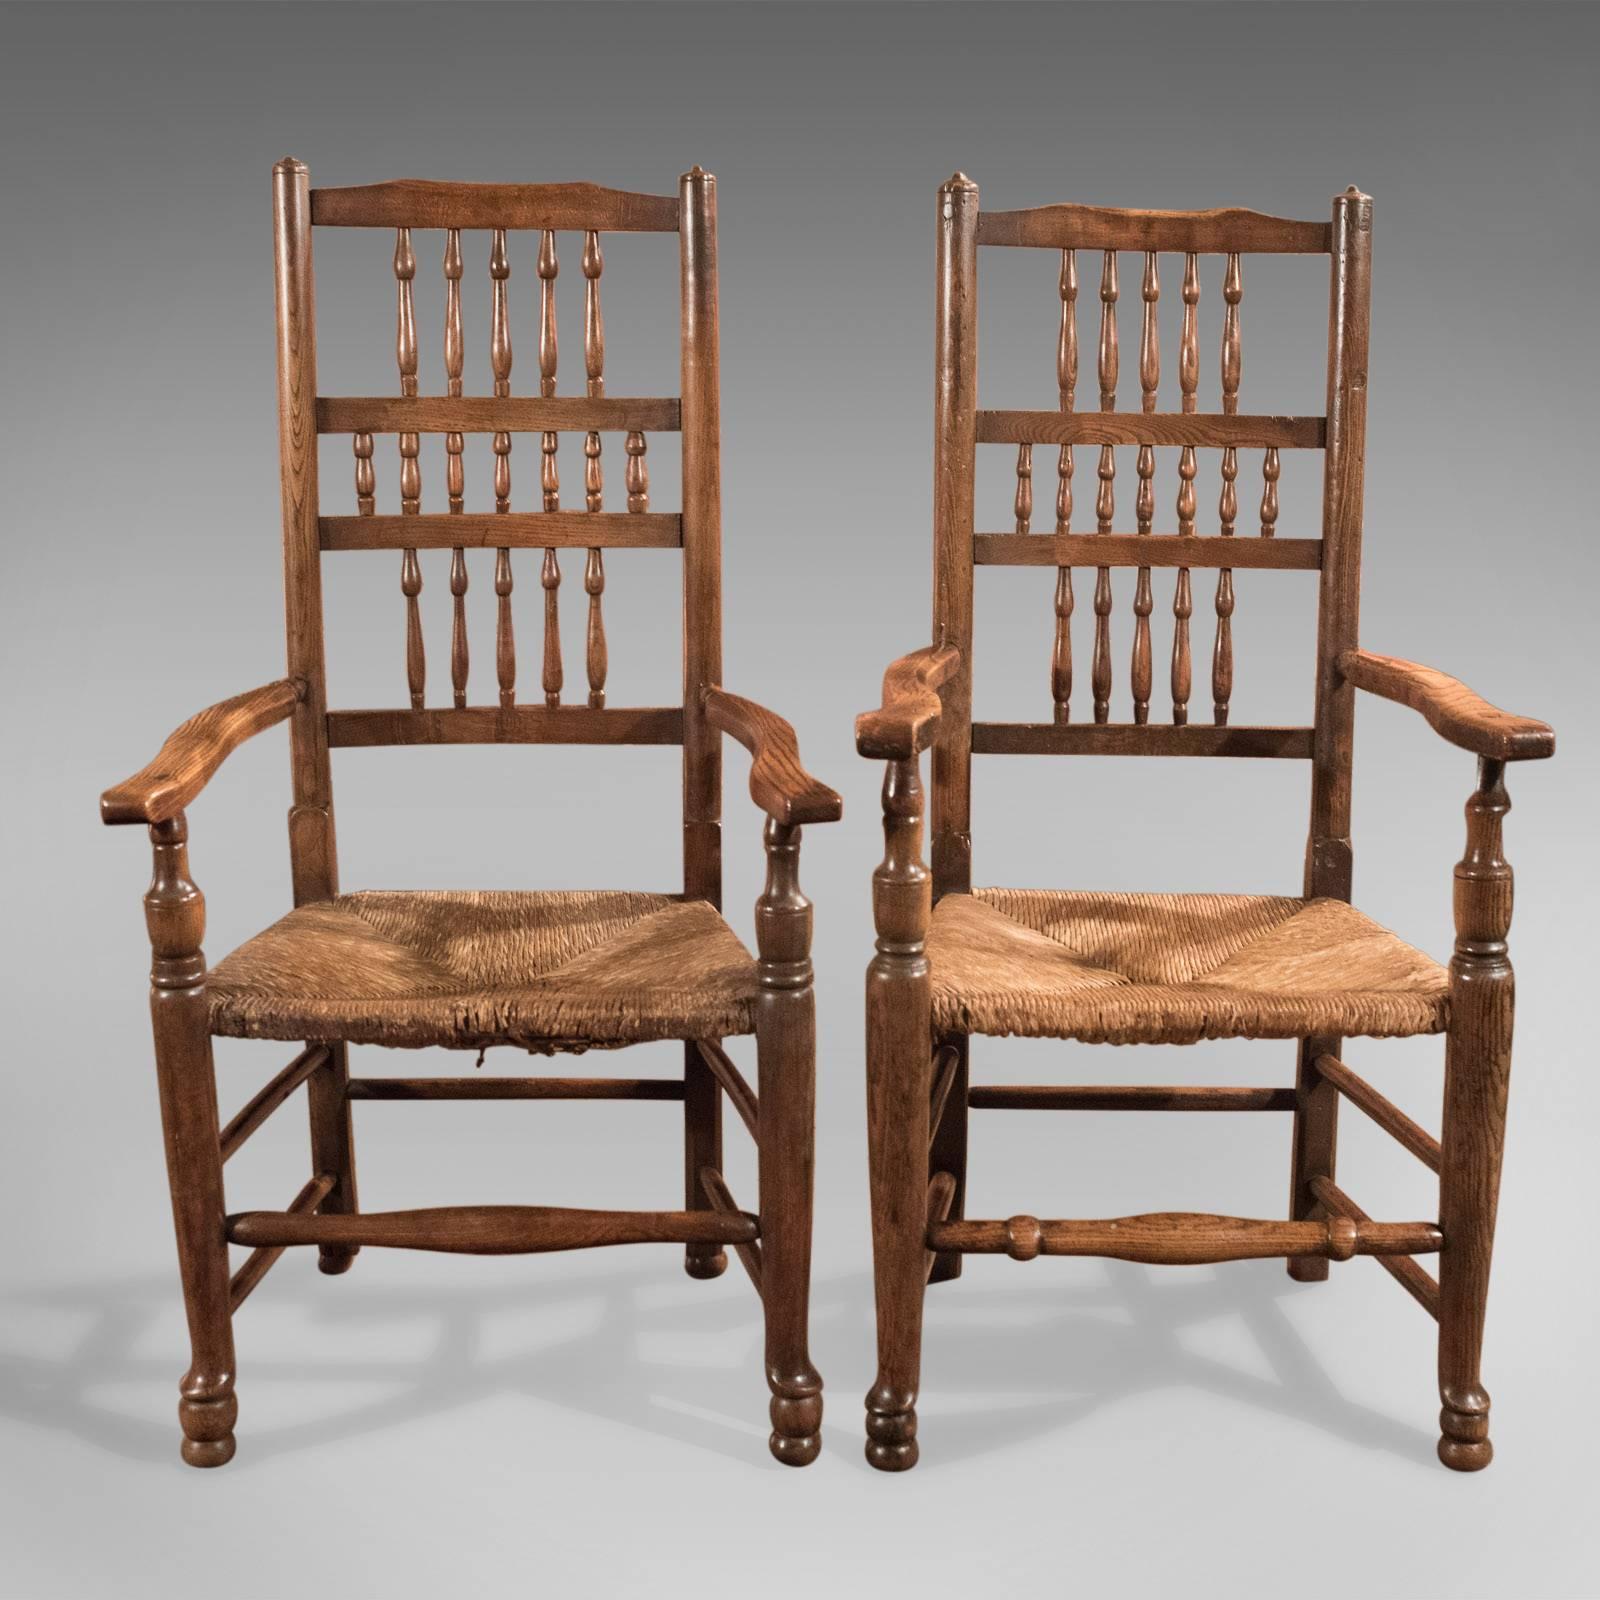 A harlequin set of Georgian, spindle back, rush seated, dining chairs comprising five singles (three and two) and two carvers dating to circa 1800.

Crafted in traditional oak, ash and elm
Wonderfully rich patinated original wax finish and